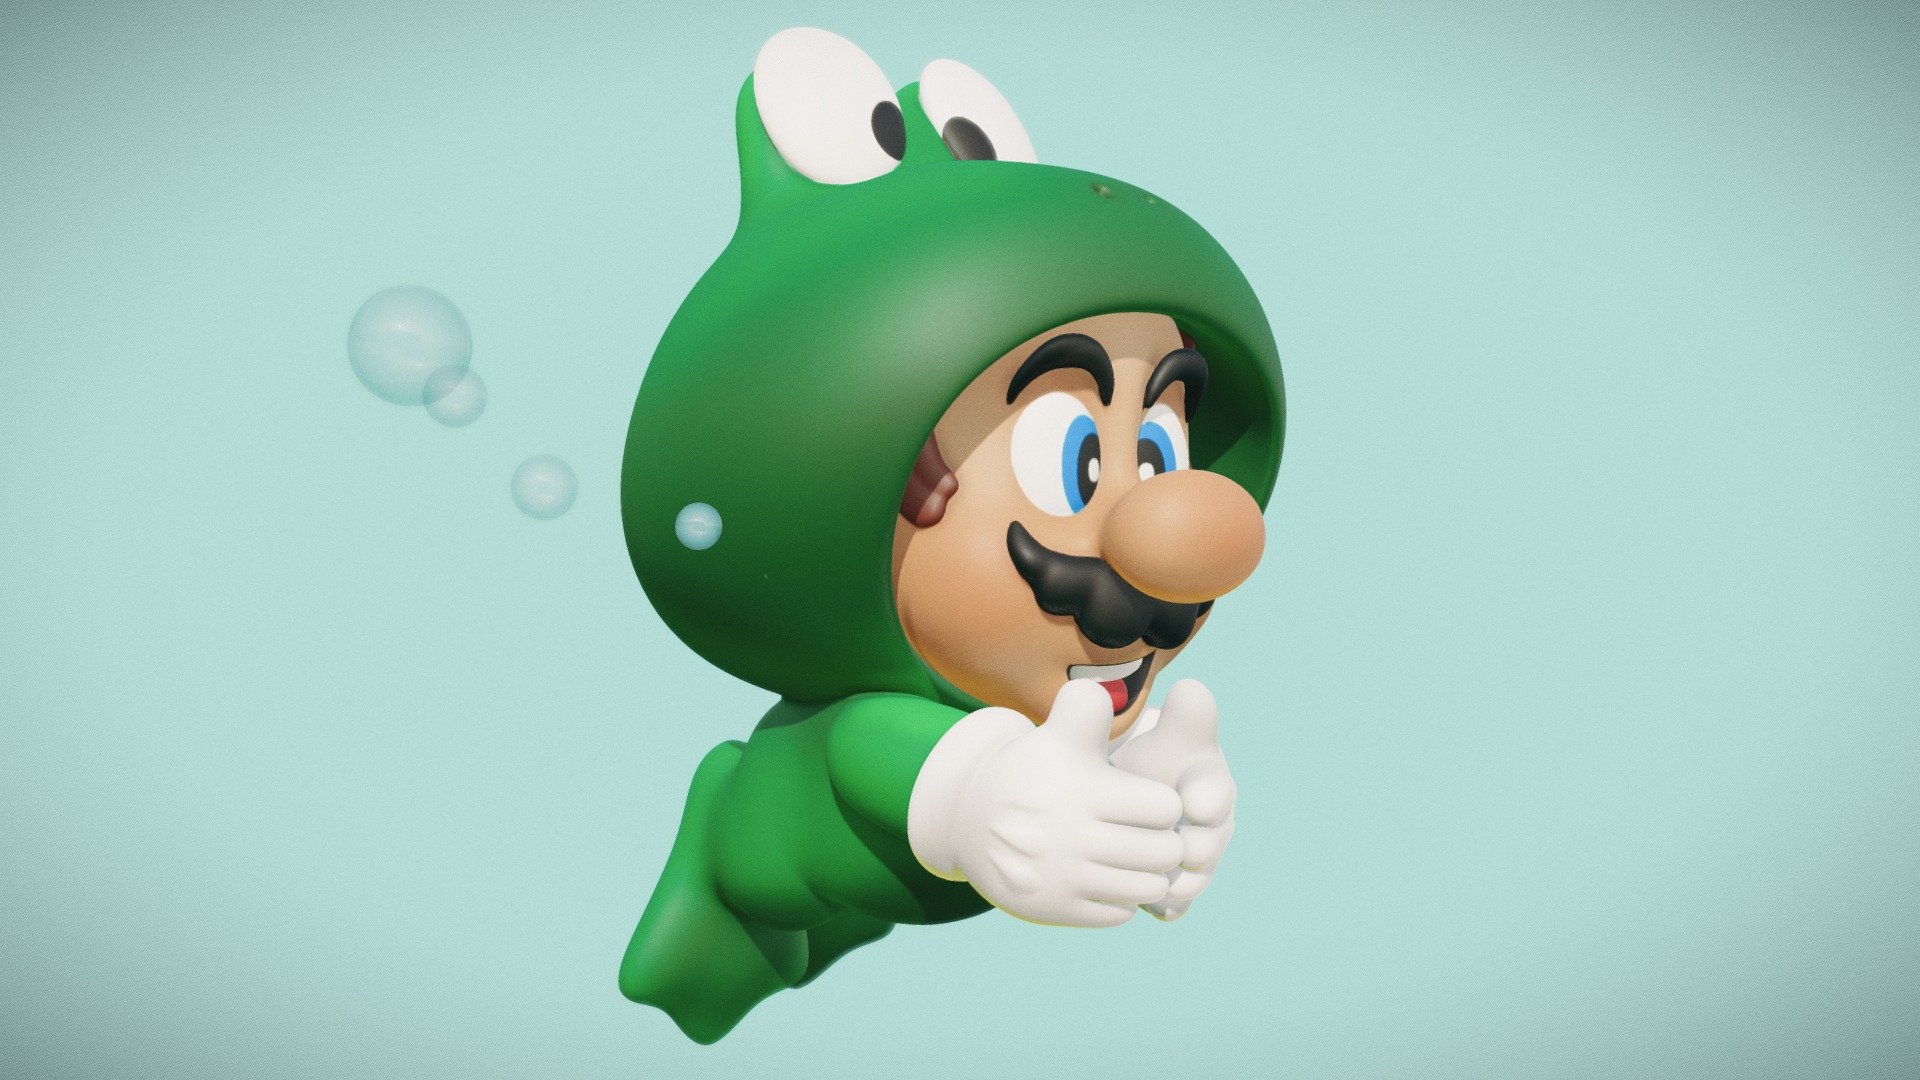 Fanart Inspired from Super Mario Bros 3 concept art of Frog Mario .
Can be used to 3d print 
You can follow my work on Instagram https://www.instagram.com/tonoftoons/ 
Made in Zbrush - Frog Mario - Super Mario 3 - Buy Royalty Free 3D model by rendermodel 3d model